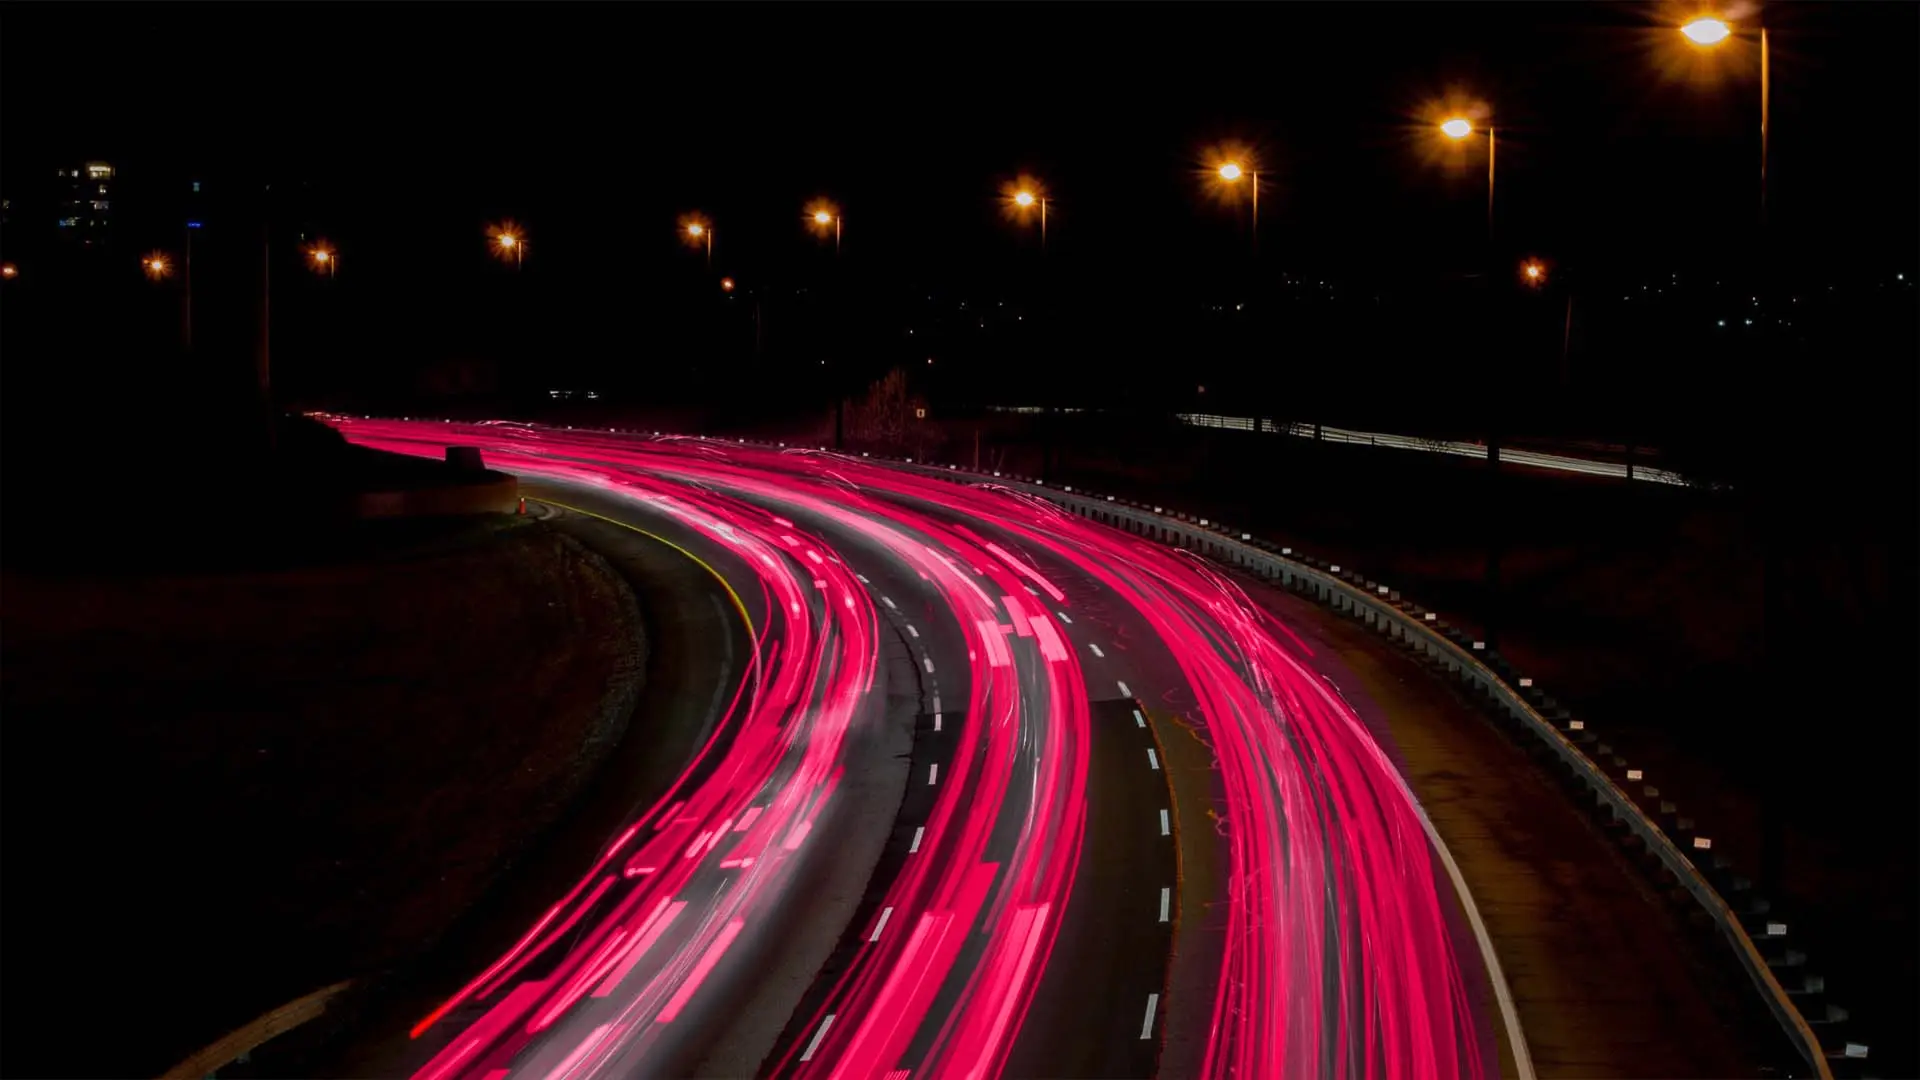 expressway at night with pink tail lights